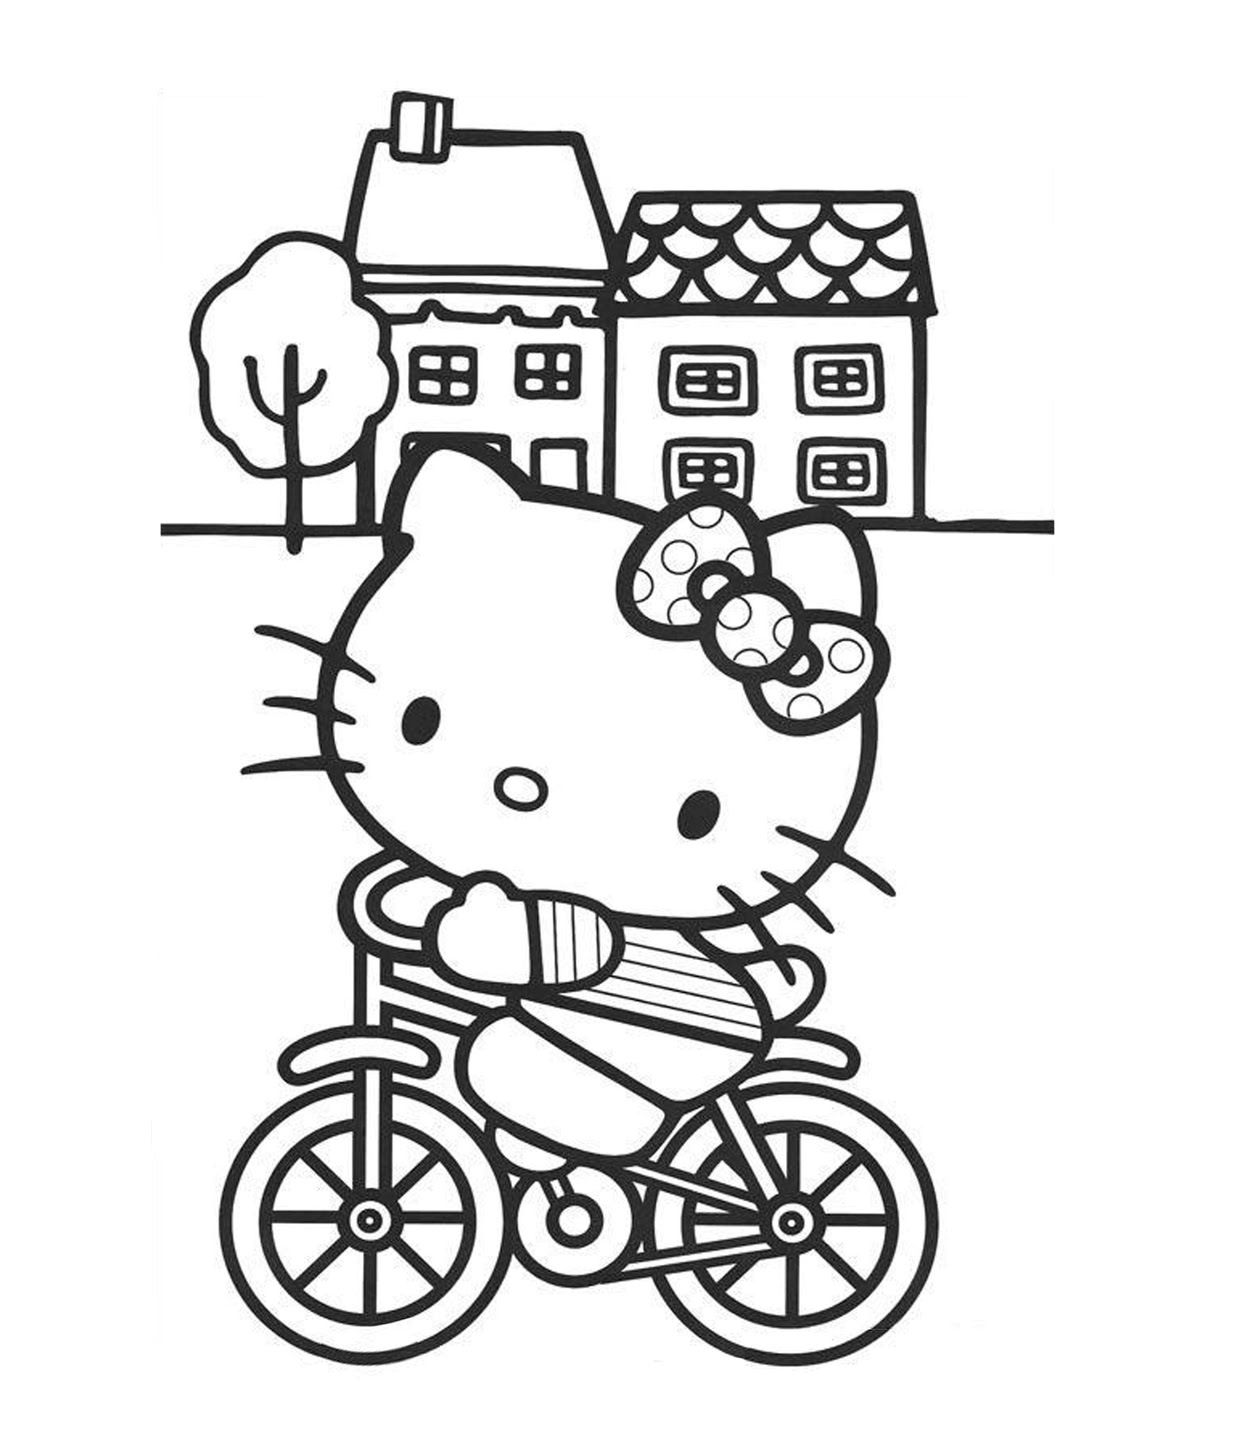 Bicycle Coloring Page For Kids | Transportation Coloring pages of ...